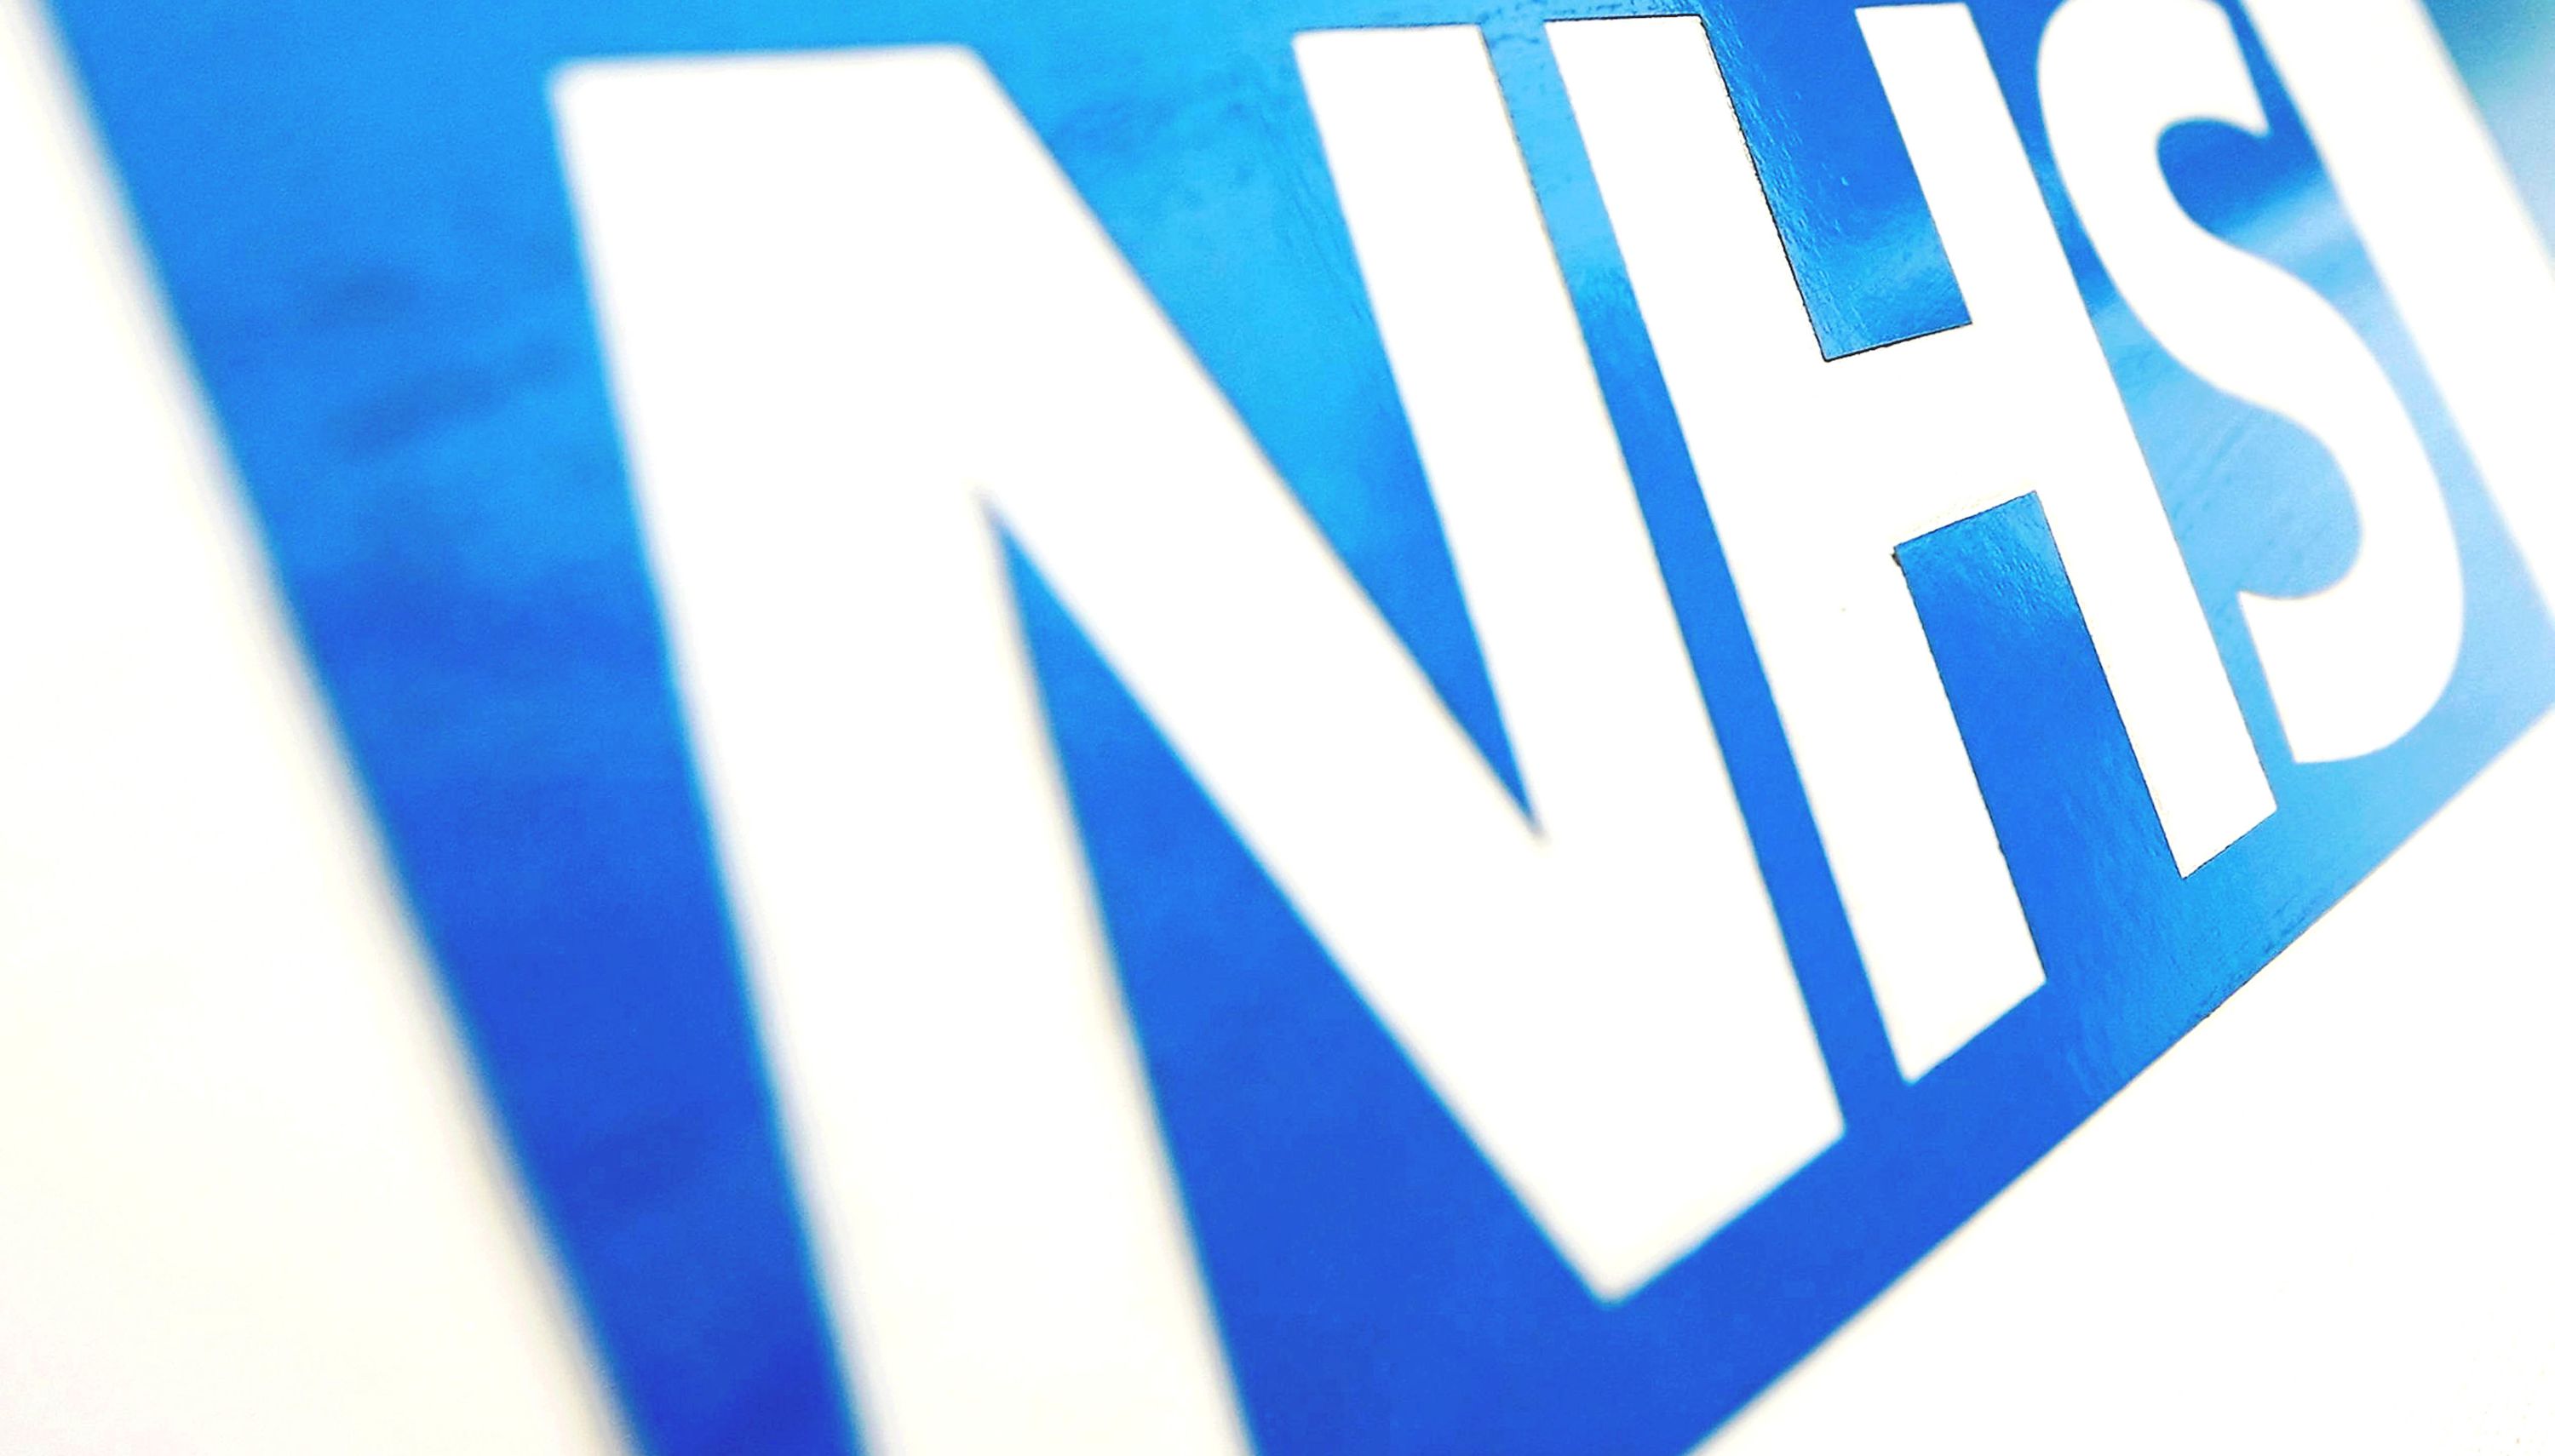 The report calls for a shake up or leadership within the NHS